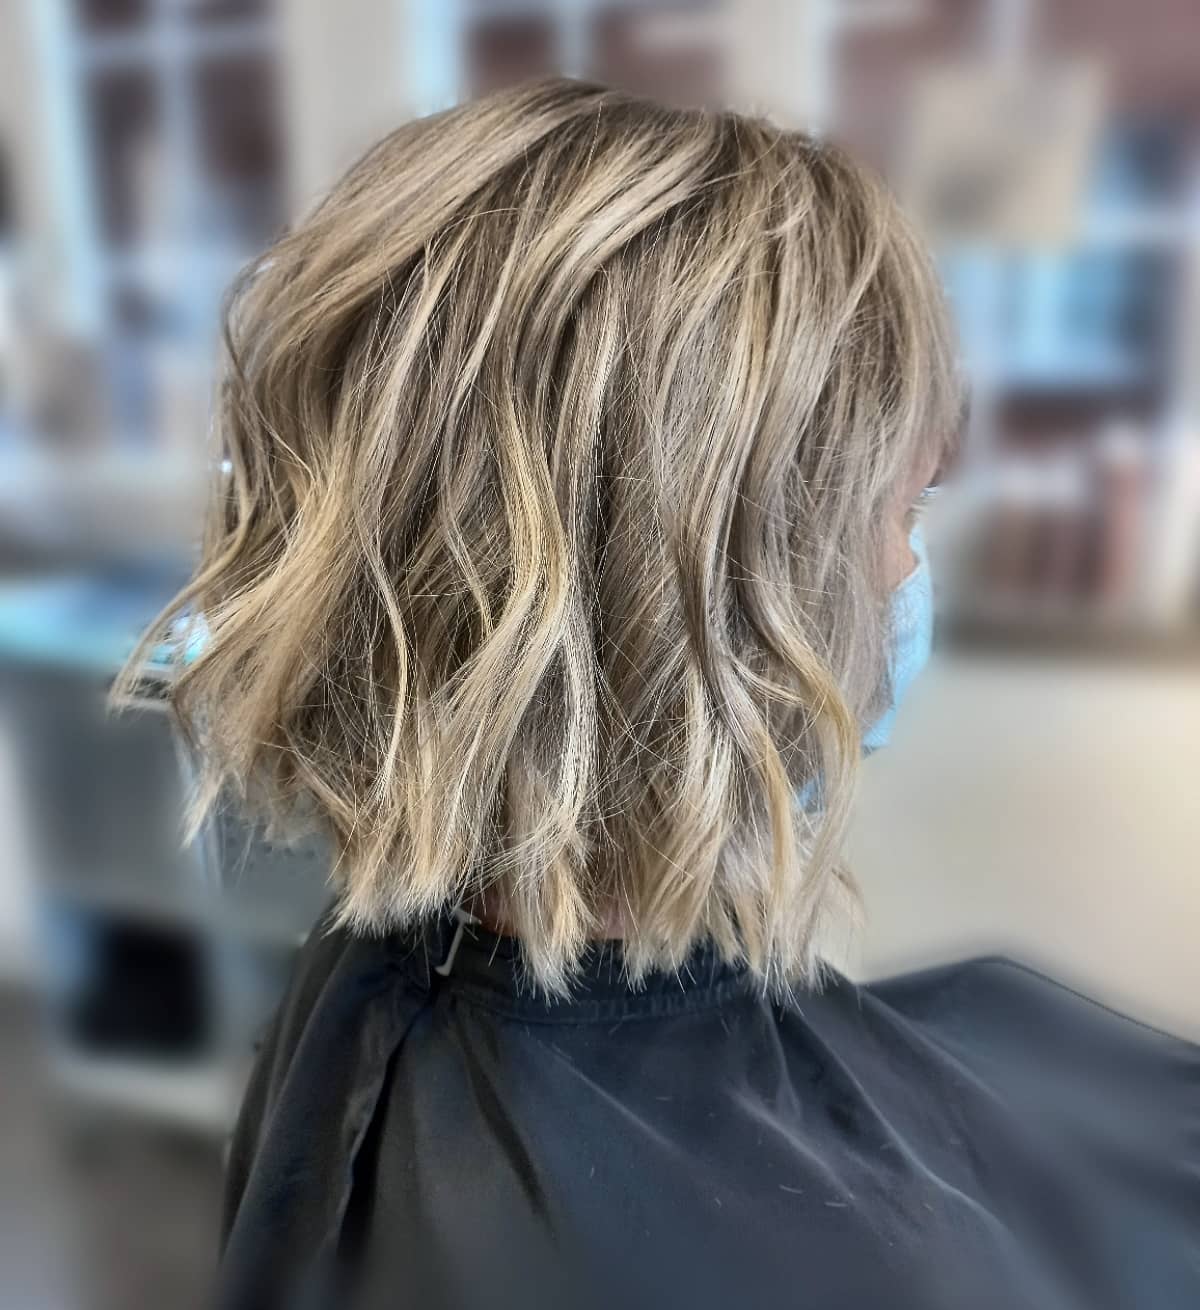 Shoulder Length Hairstyle 20 Below shoulder length haircuts | Short to mid length hairstyles | Shoulder length haircuts for thick hair Shoulder Length Hairstyles for Women